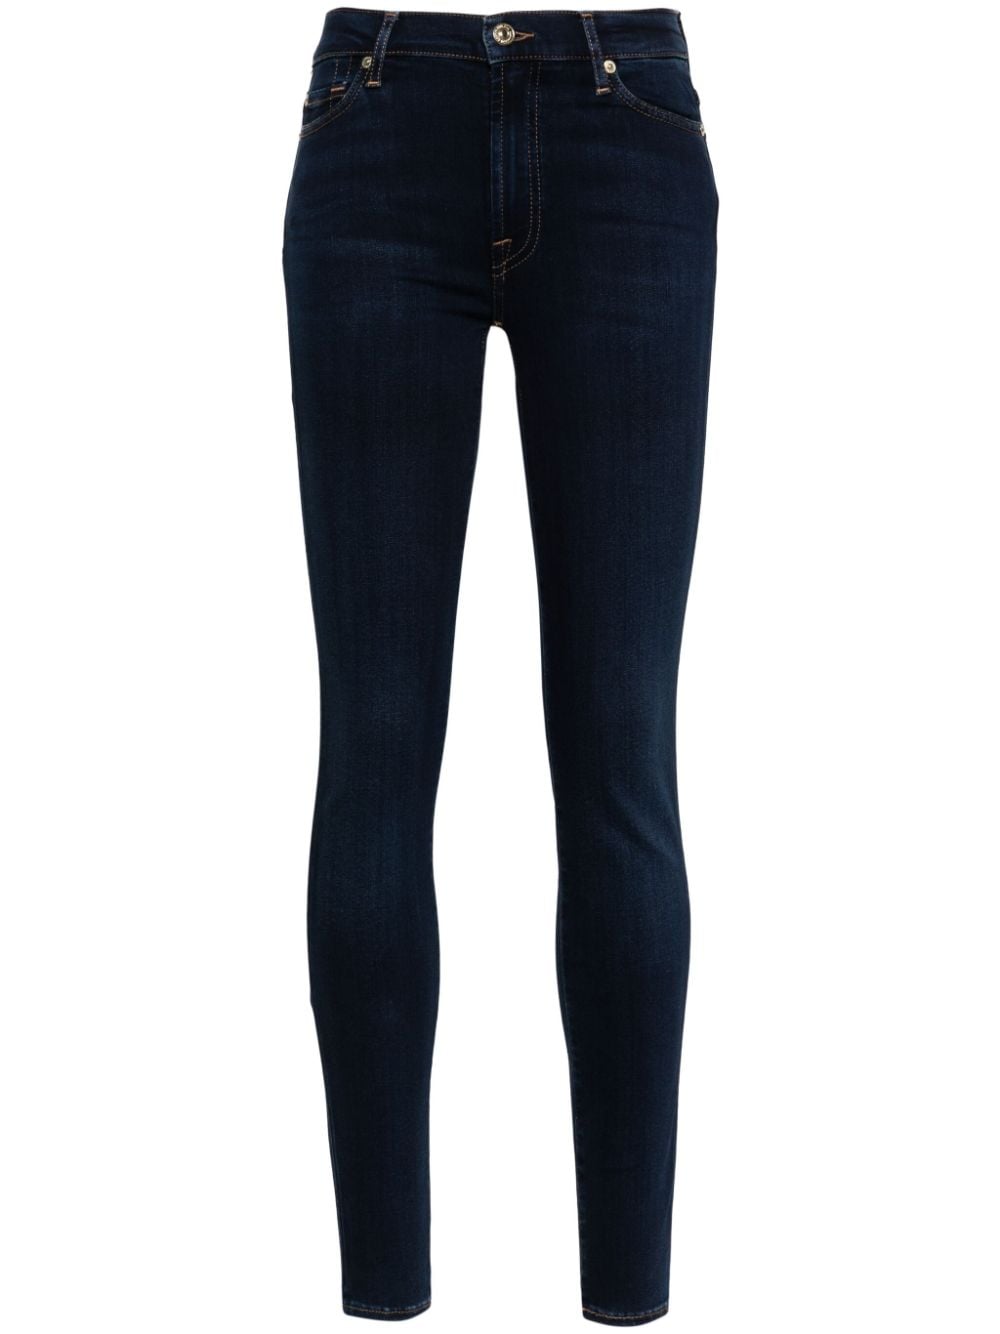 7 For All Mankind Illusion Luxe mid-rise skinny jeans - Blue von 7 For All Mankind